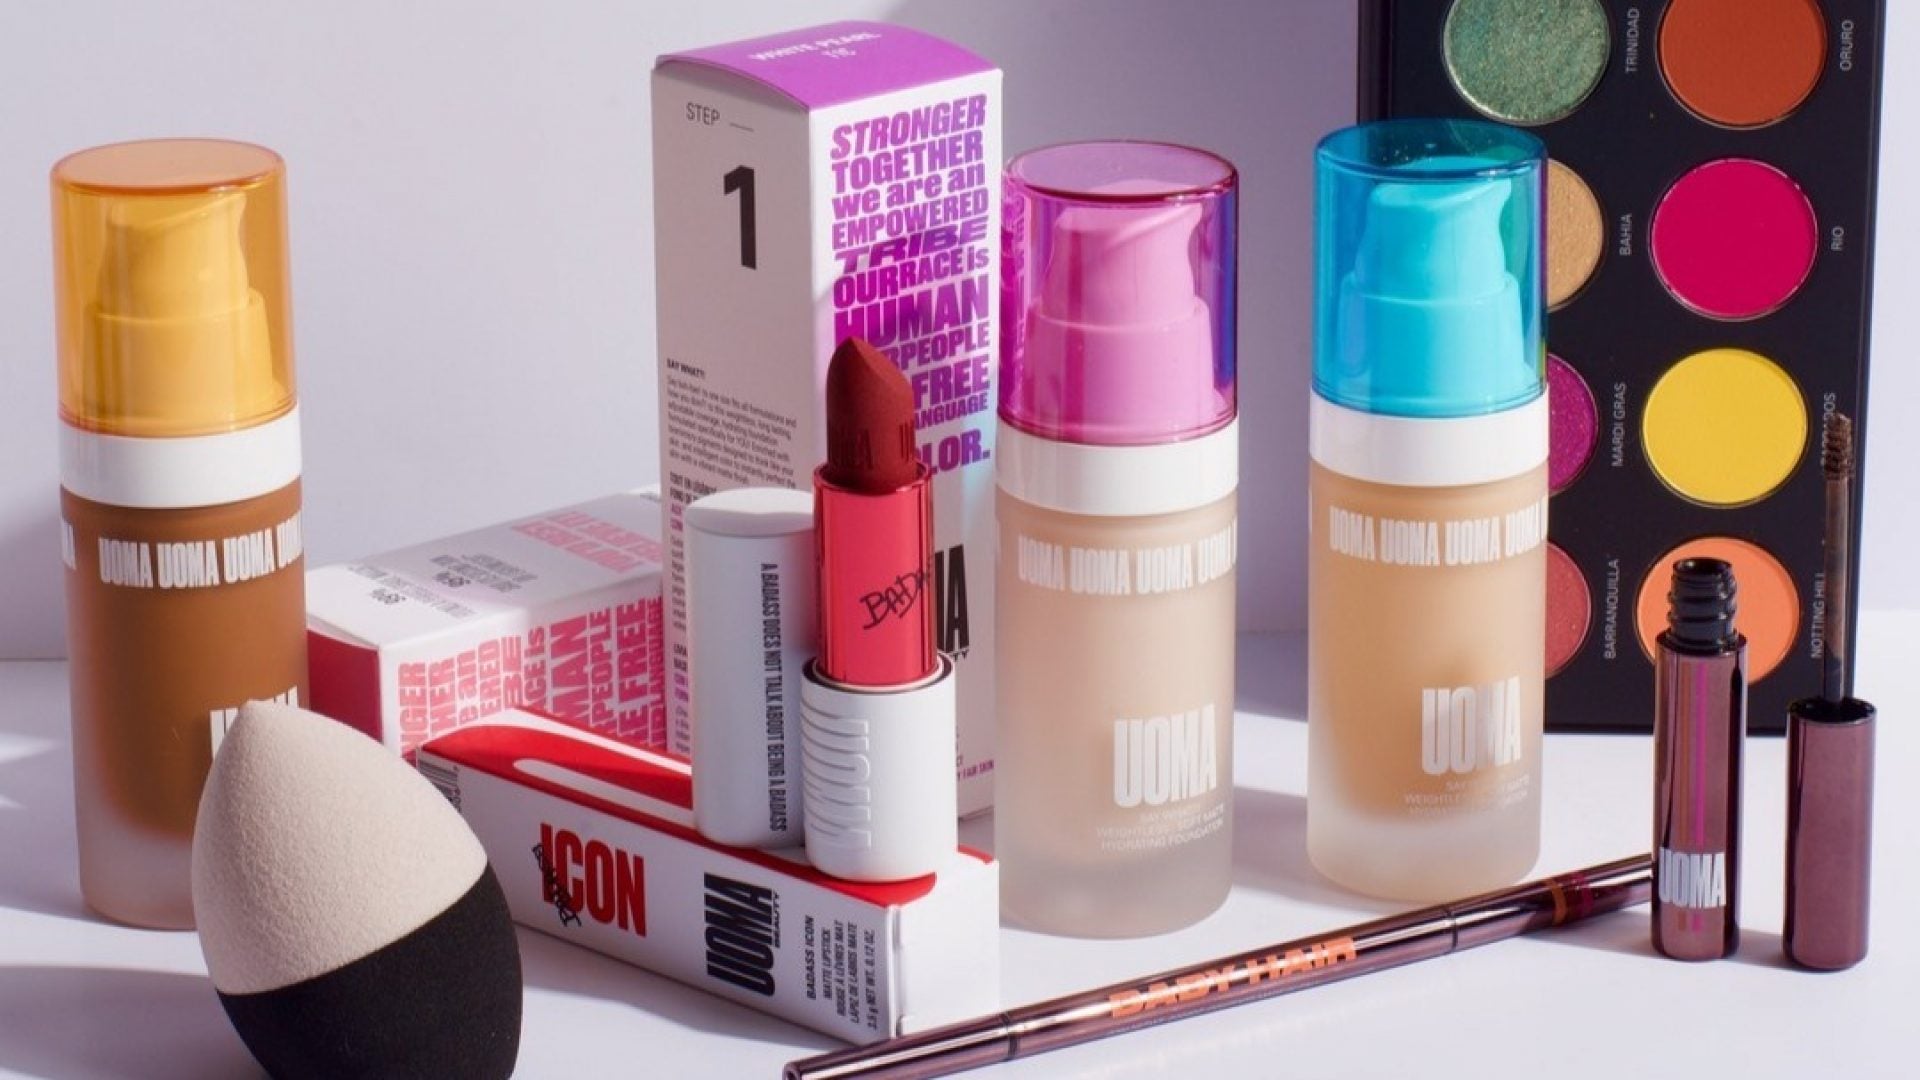 Representation Matters! Uoma Beauty Is Now At Nordstrom